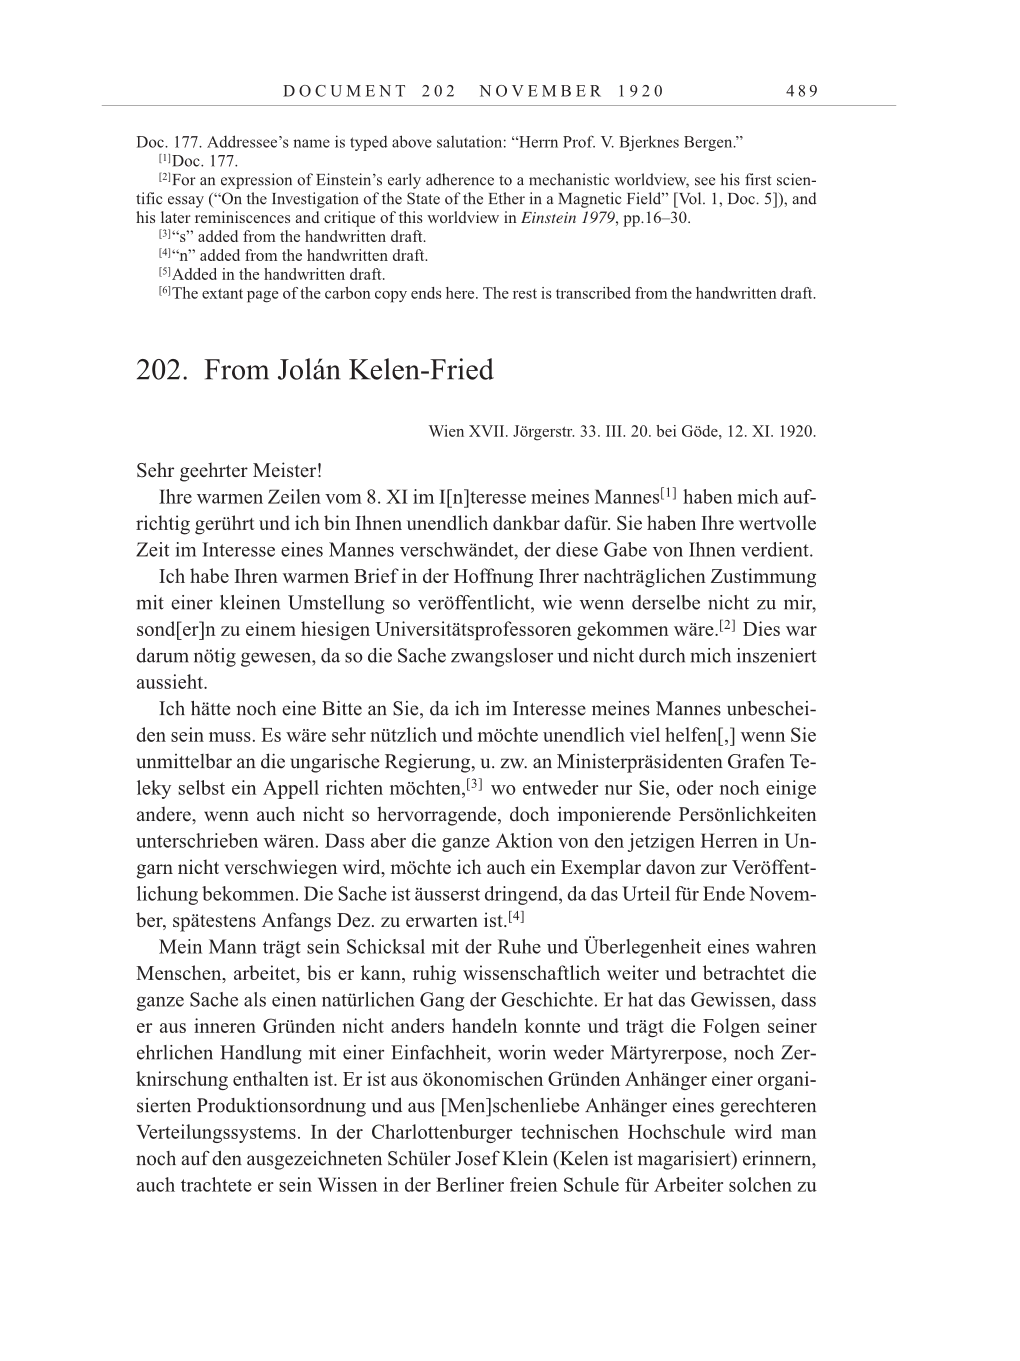 Volume 10: The Berlin Years: Correspondence May-December 1920 / Supplementary Correspondence 1909-1920 page 489